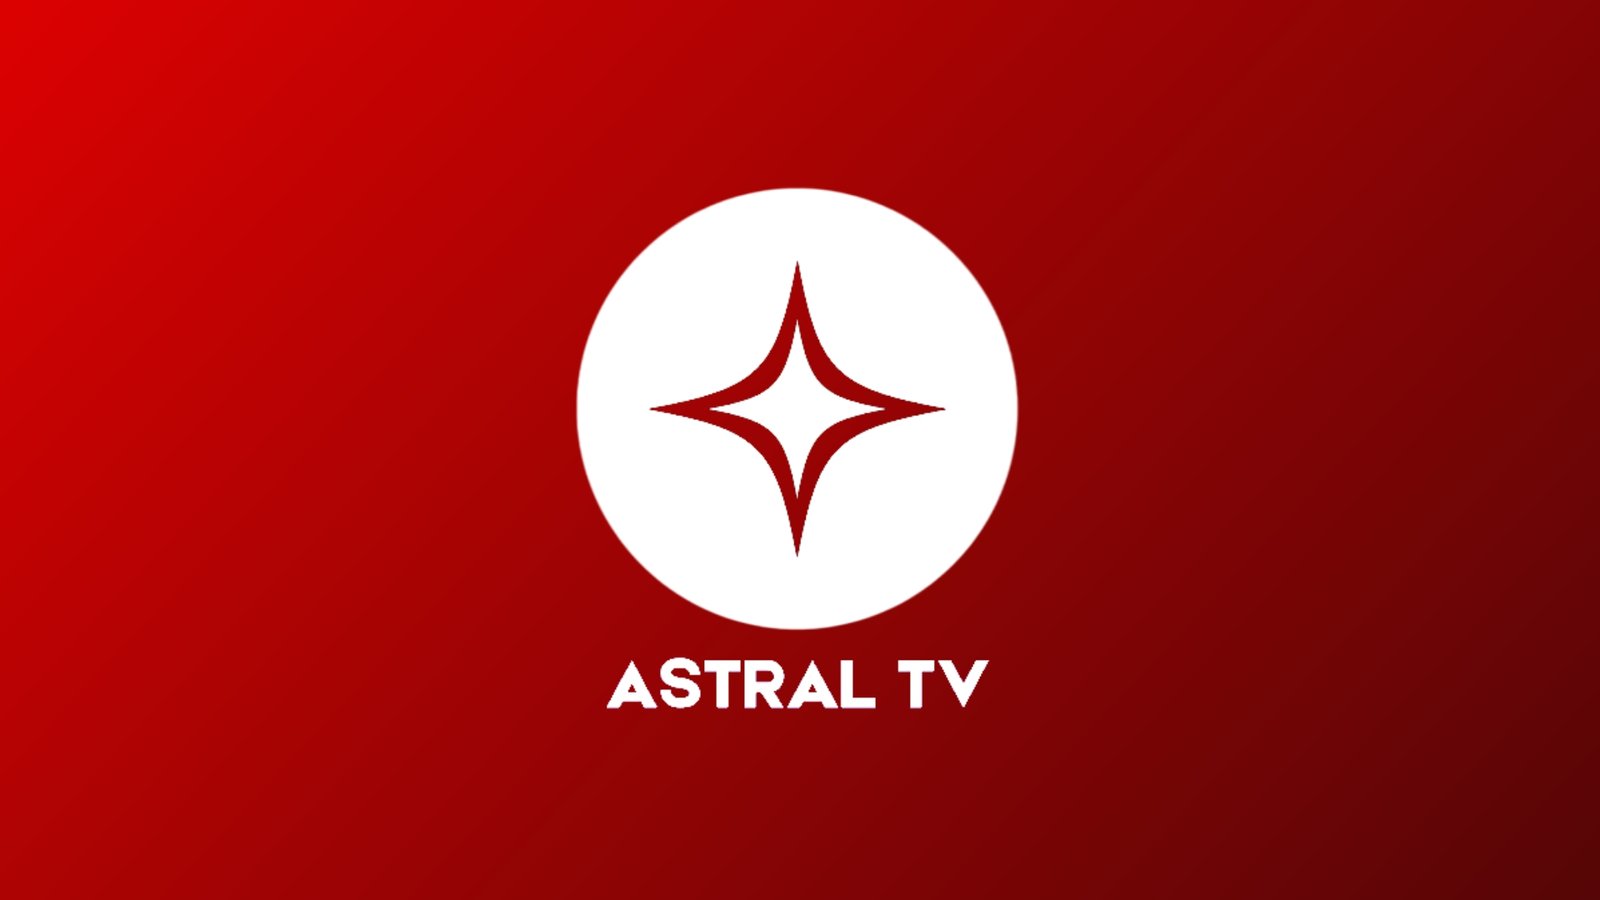 ASTRAL TV - CANAL 151